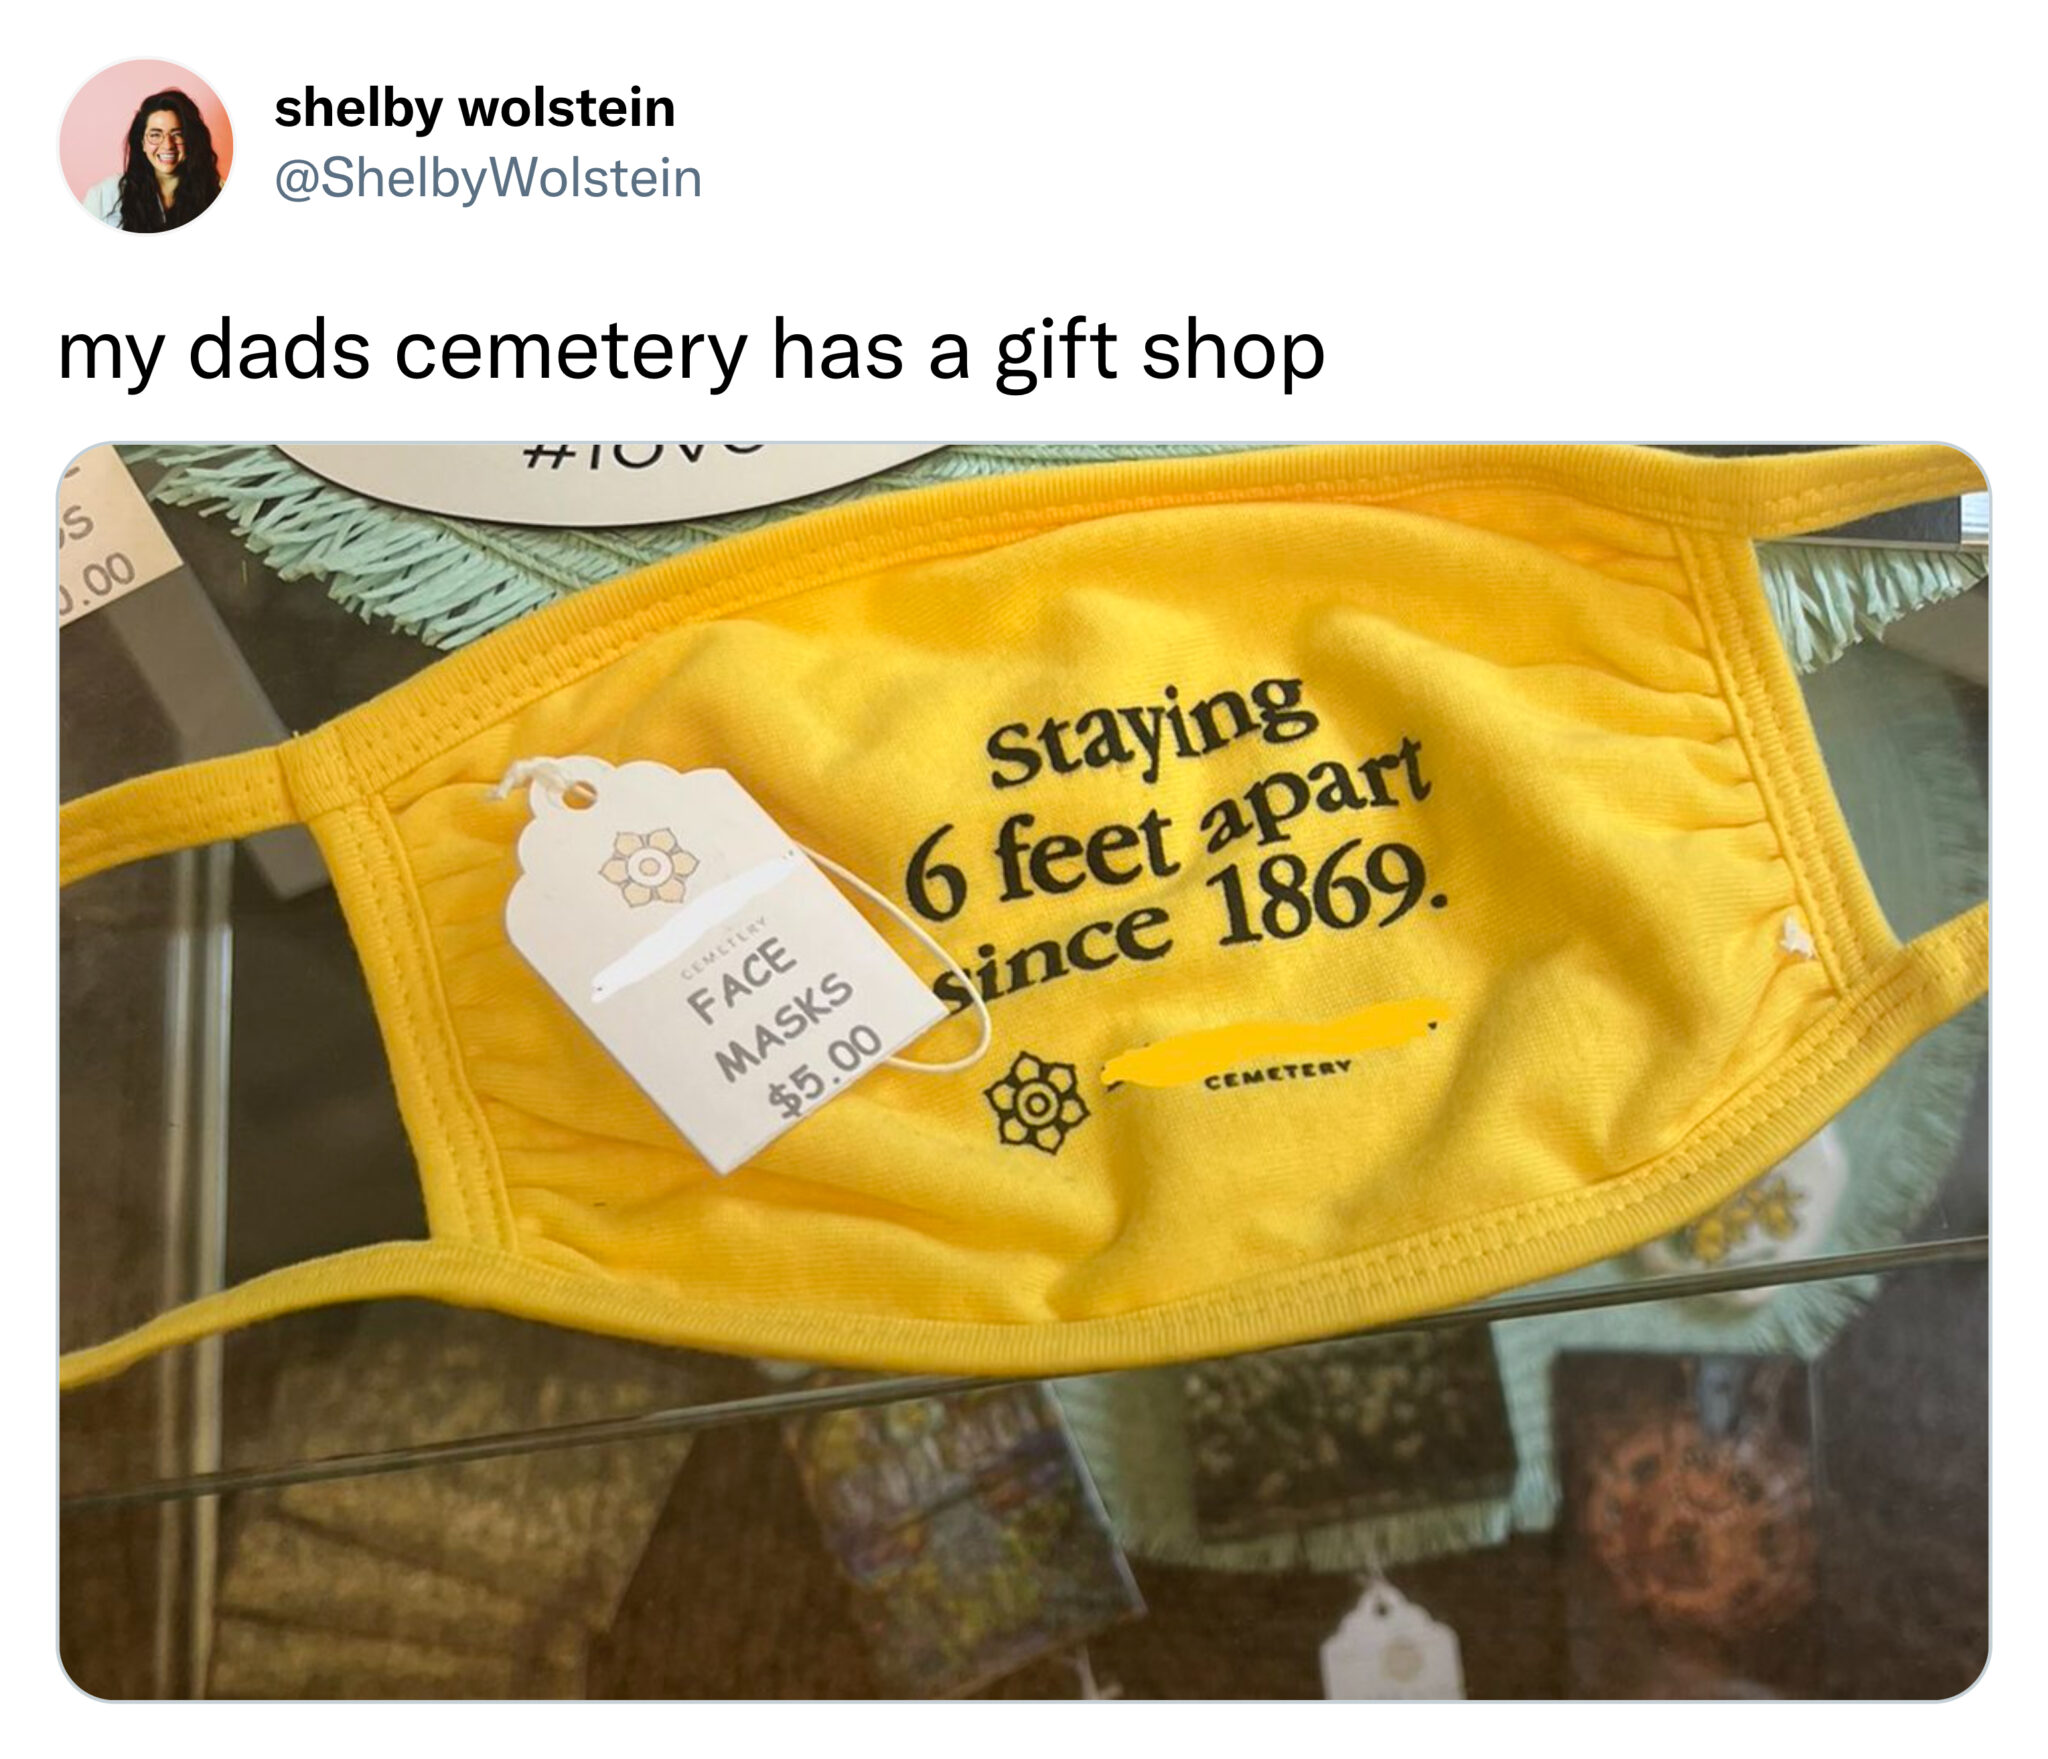 savage tweets - material - shelby wolstein my dads cemetery has a gift shop 0.00 Face Masks $5.00 staying 6 feet apart since 1869. Cemetery